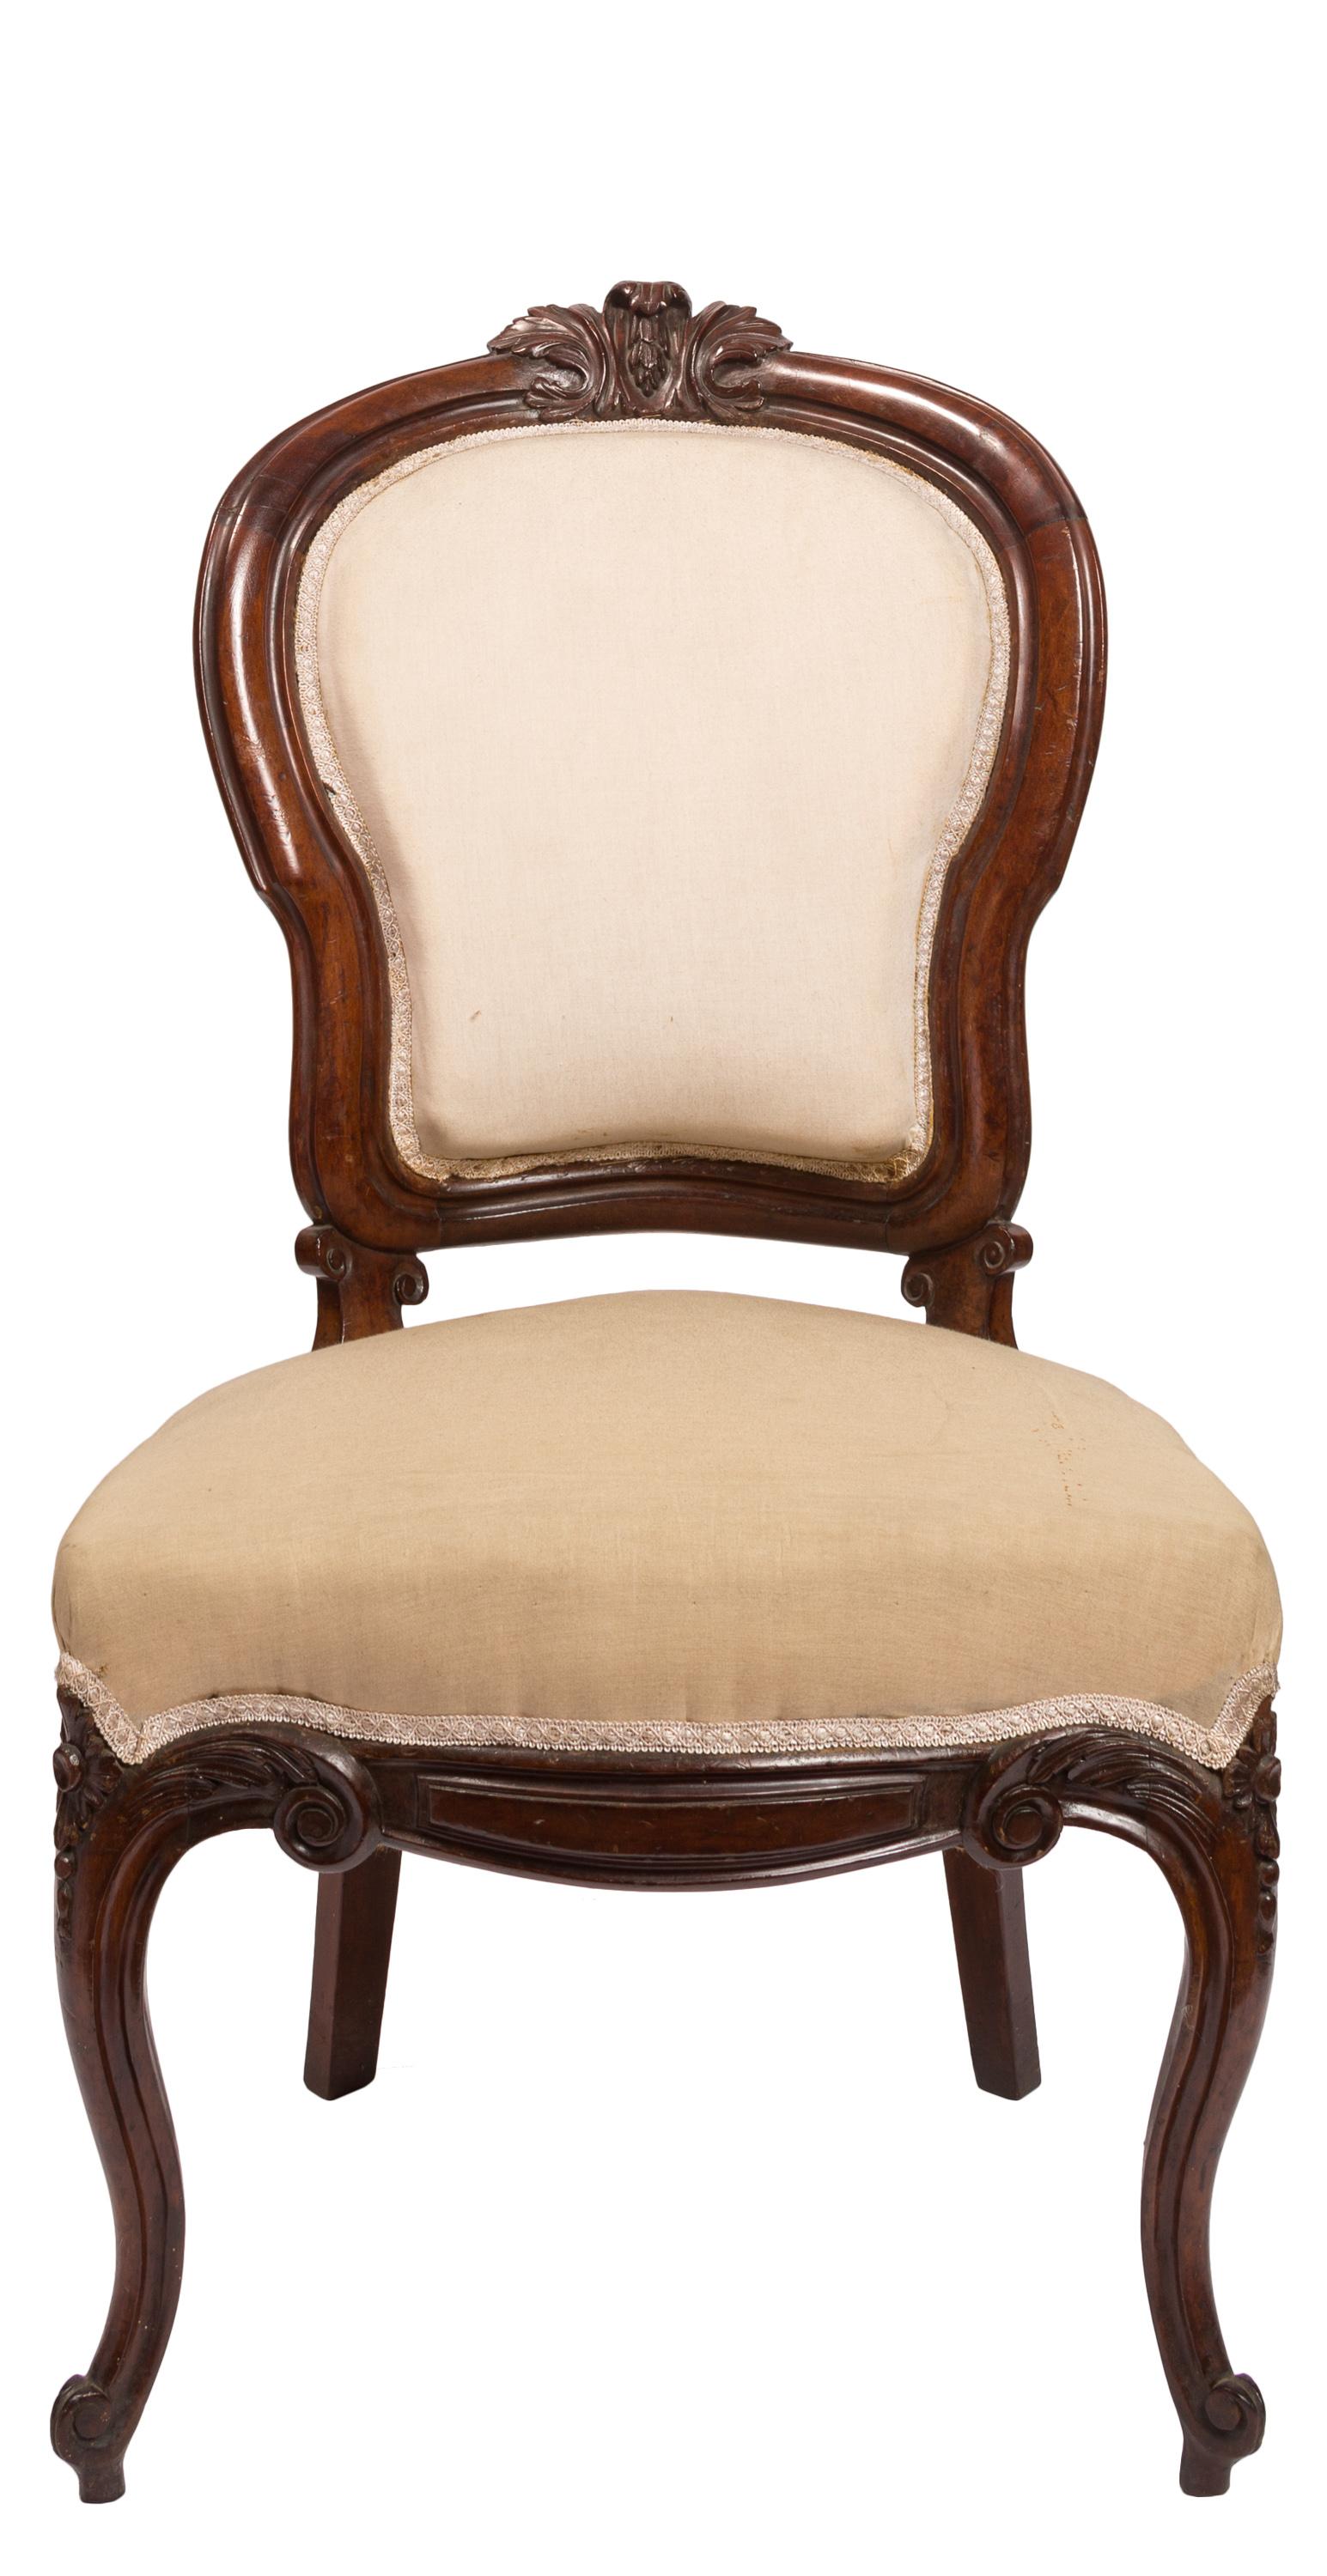 A set of six Spanish Isabelina style / Victorian period side chairs with upholstered seat and upper back. Covered in neutral fabric, they can be reupholstered to match any interior or design scheme. Standing sturdily on elegant cabriole legs, the